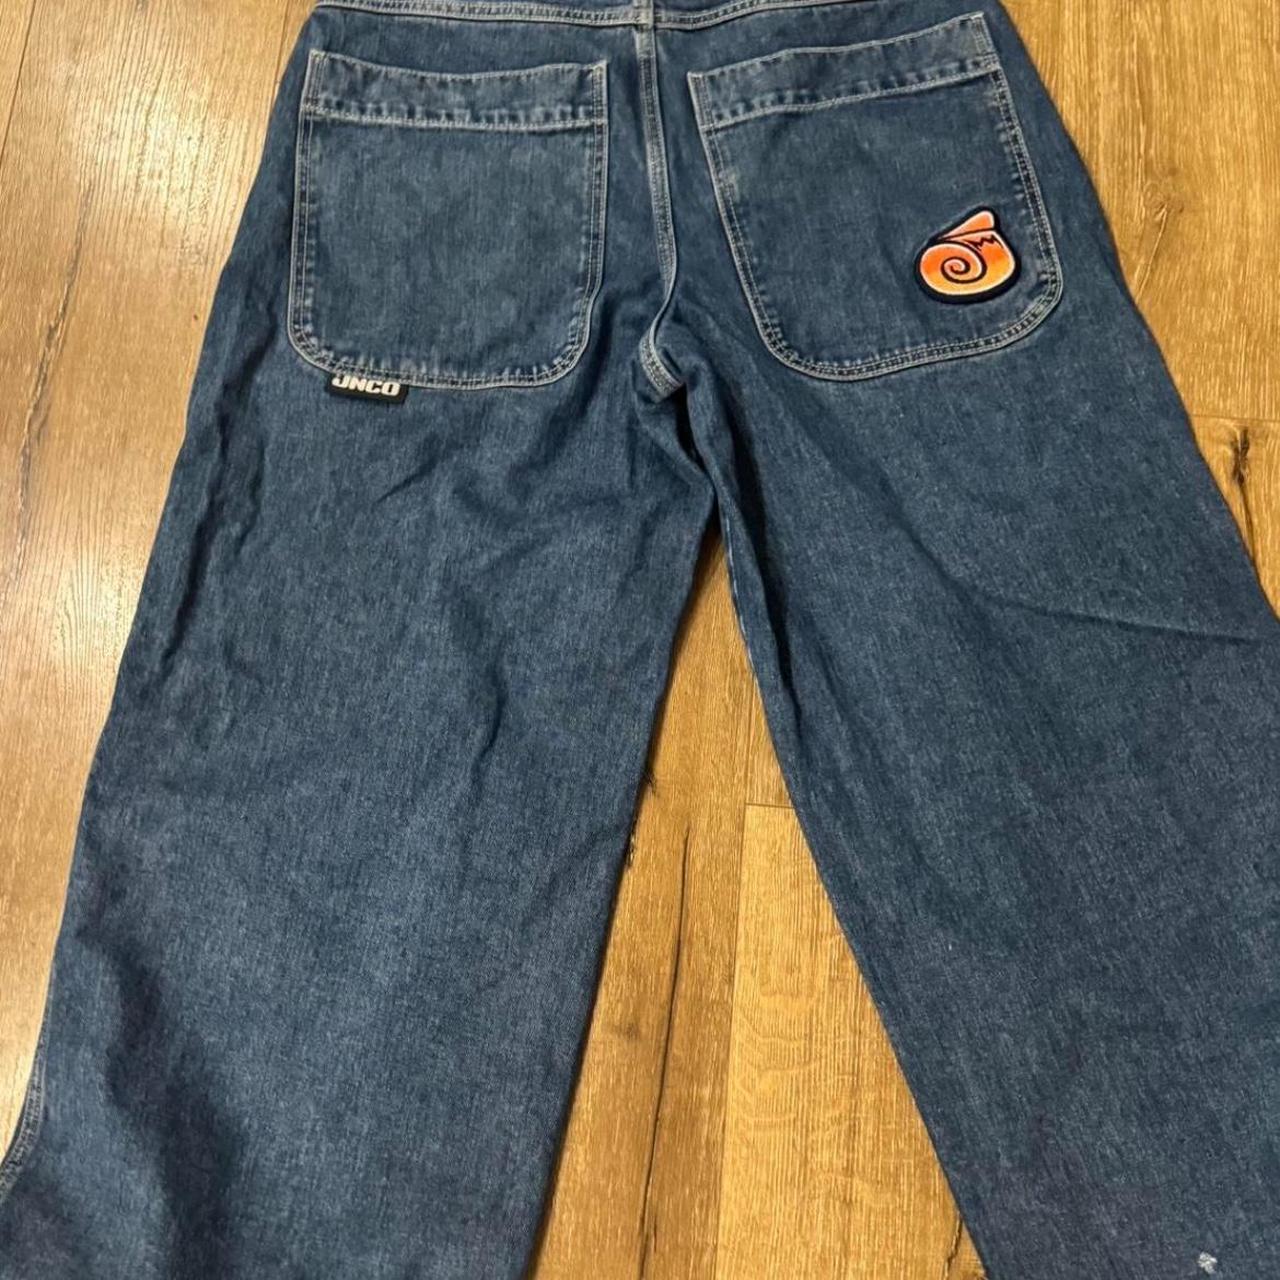 Jnco twin cannons repoped images says 36w 32L but... - Depop